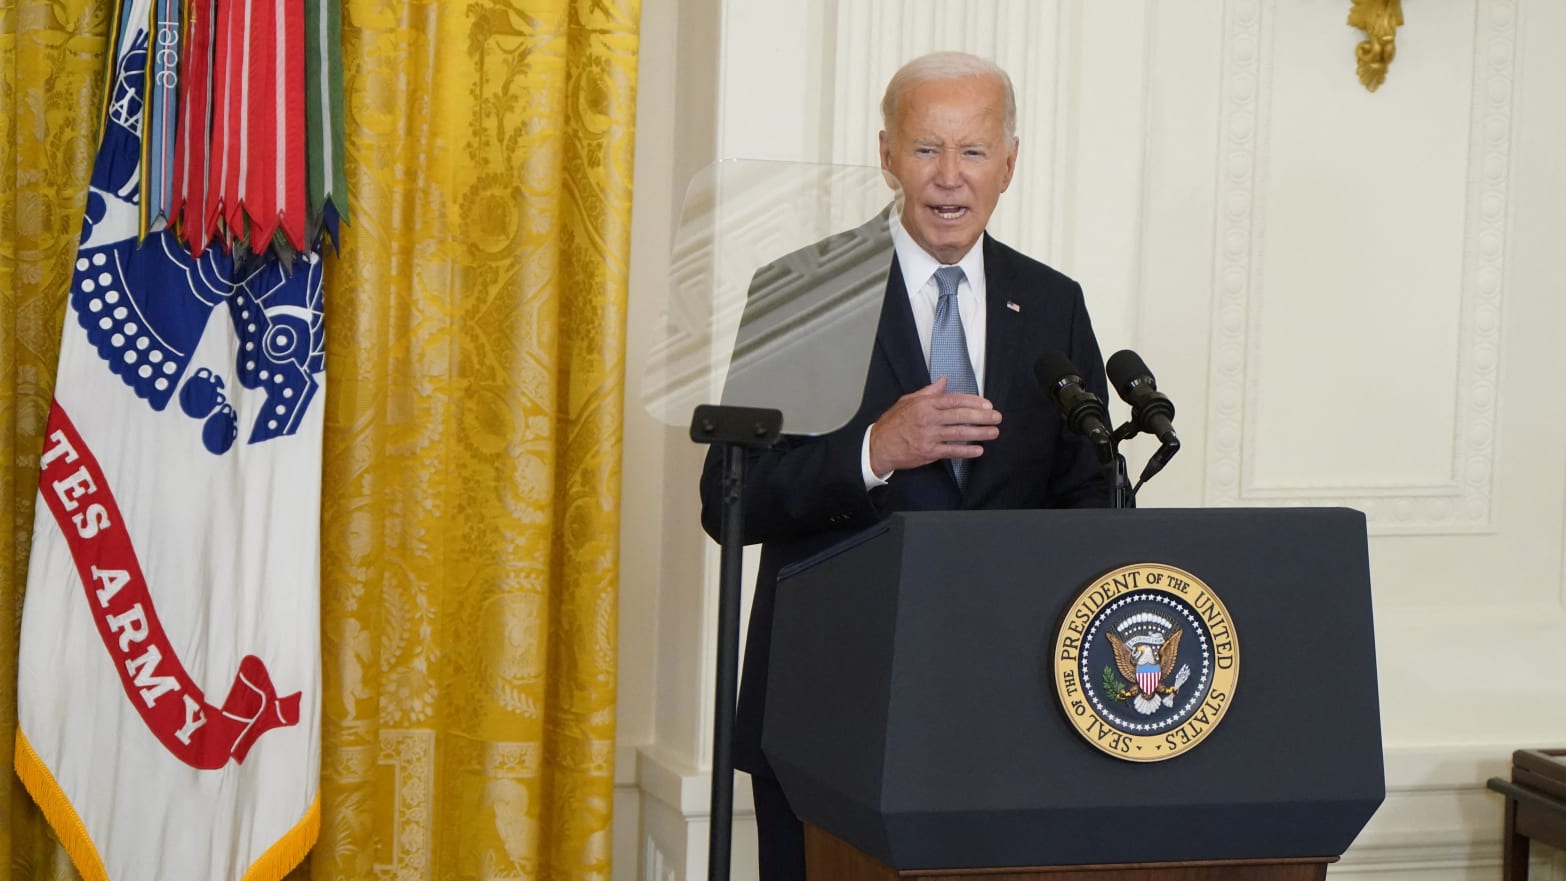 Joe Biden at the White House reading from a teleprompter